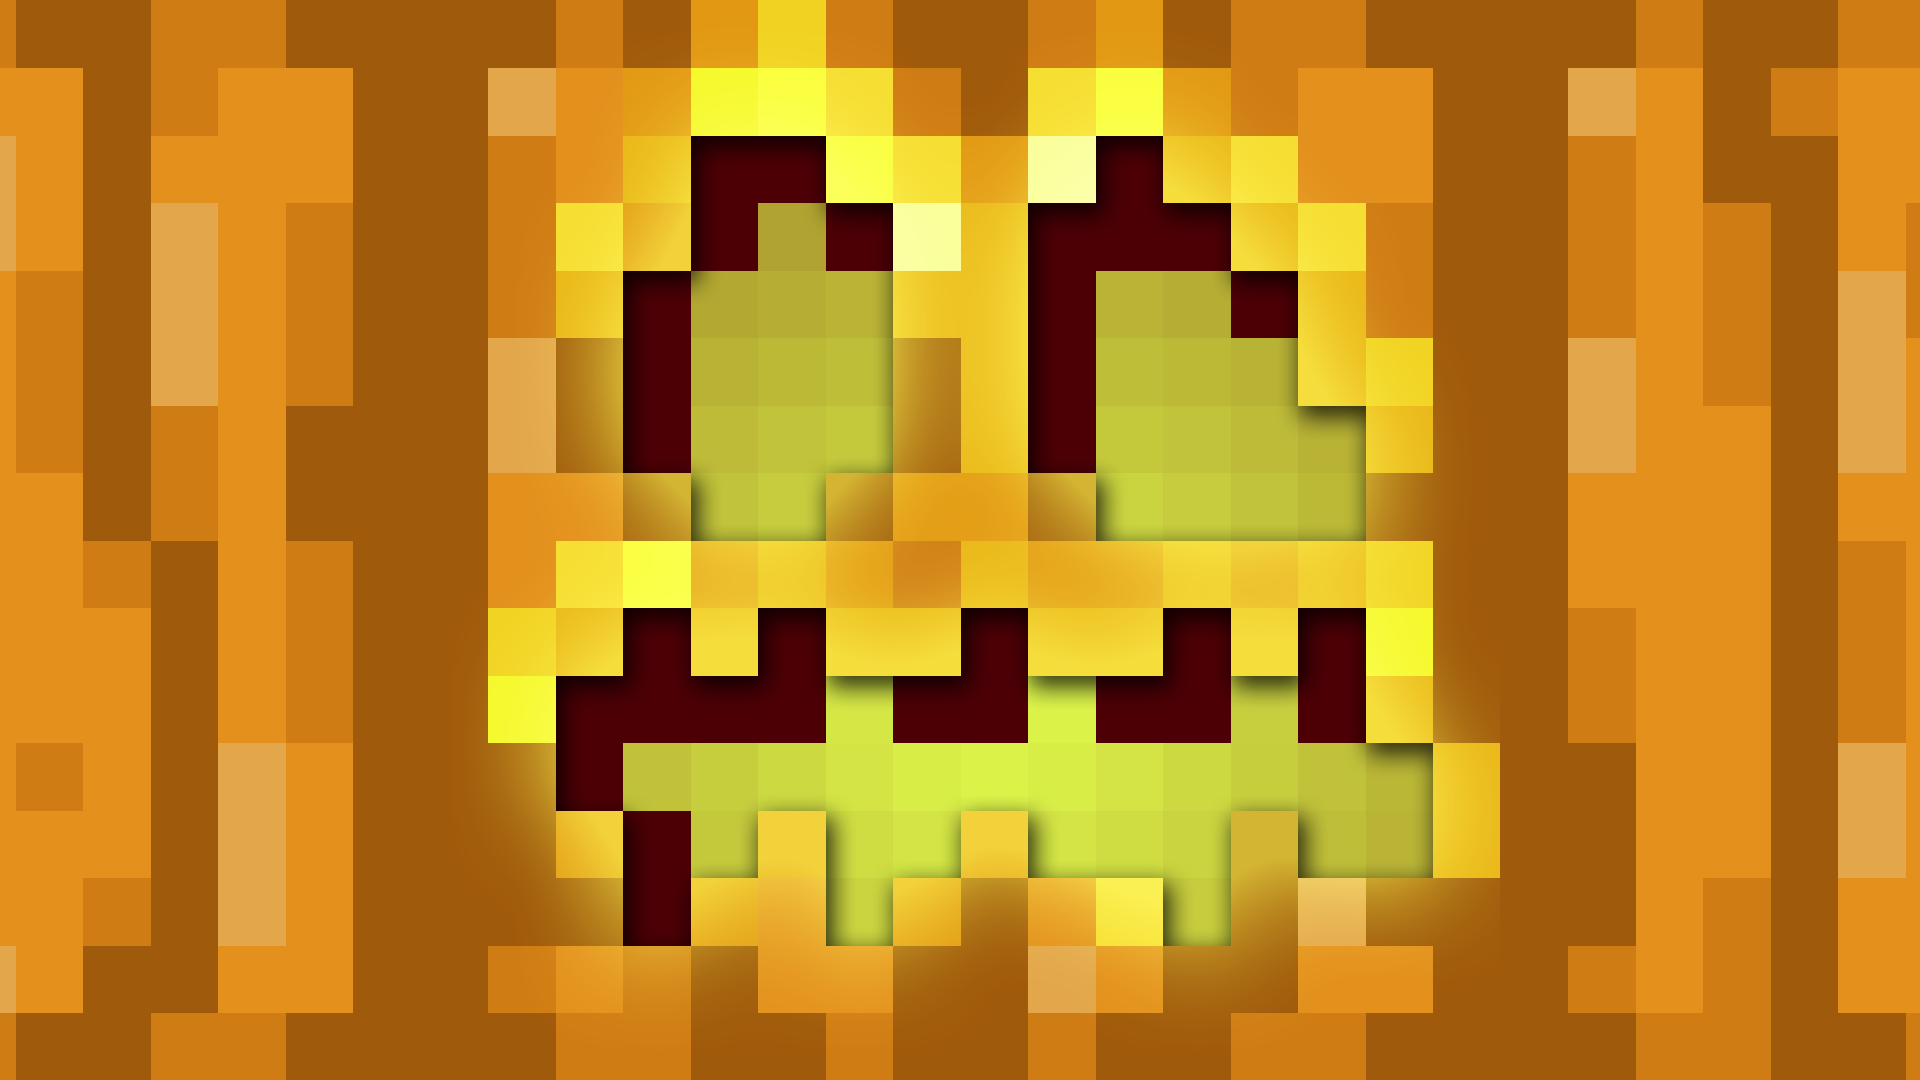 1080p] Minecraft Jack 'O' Lantern Wallpaper by iWithered on DeviantArt